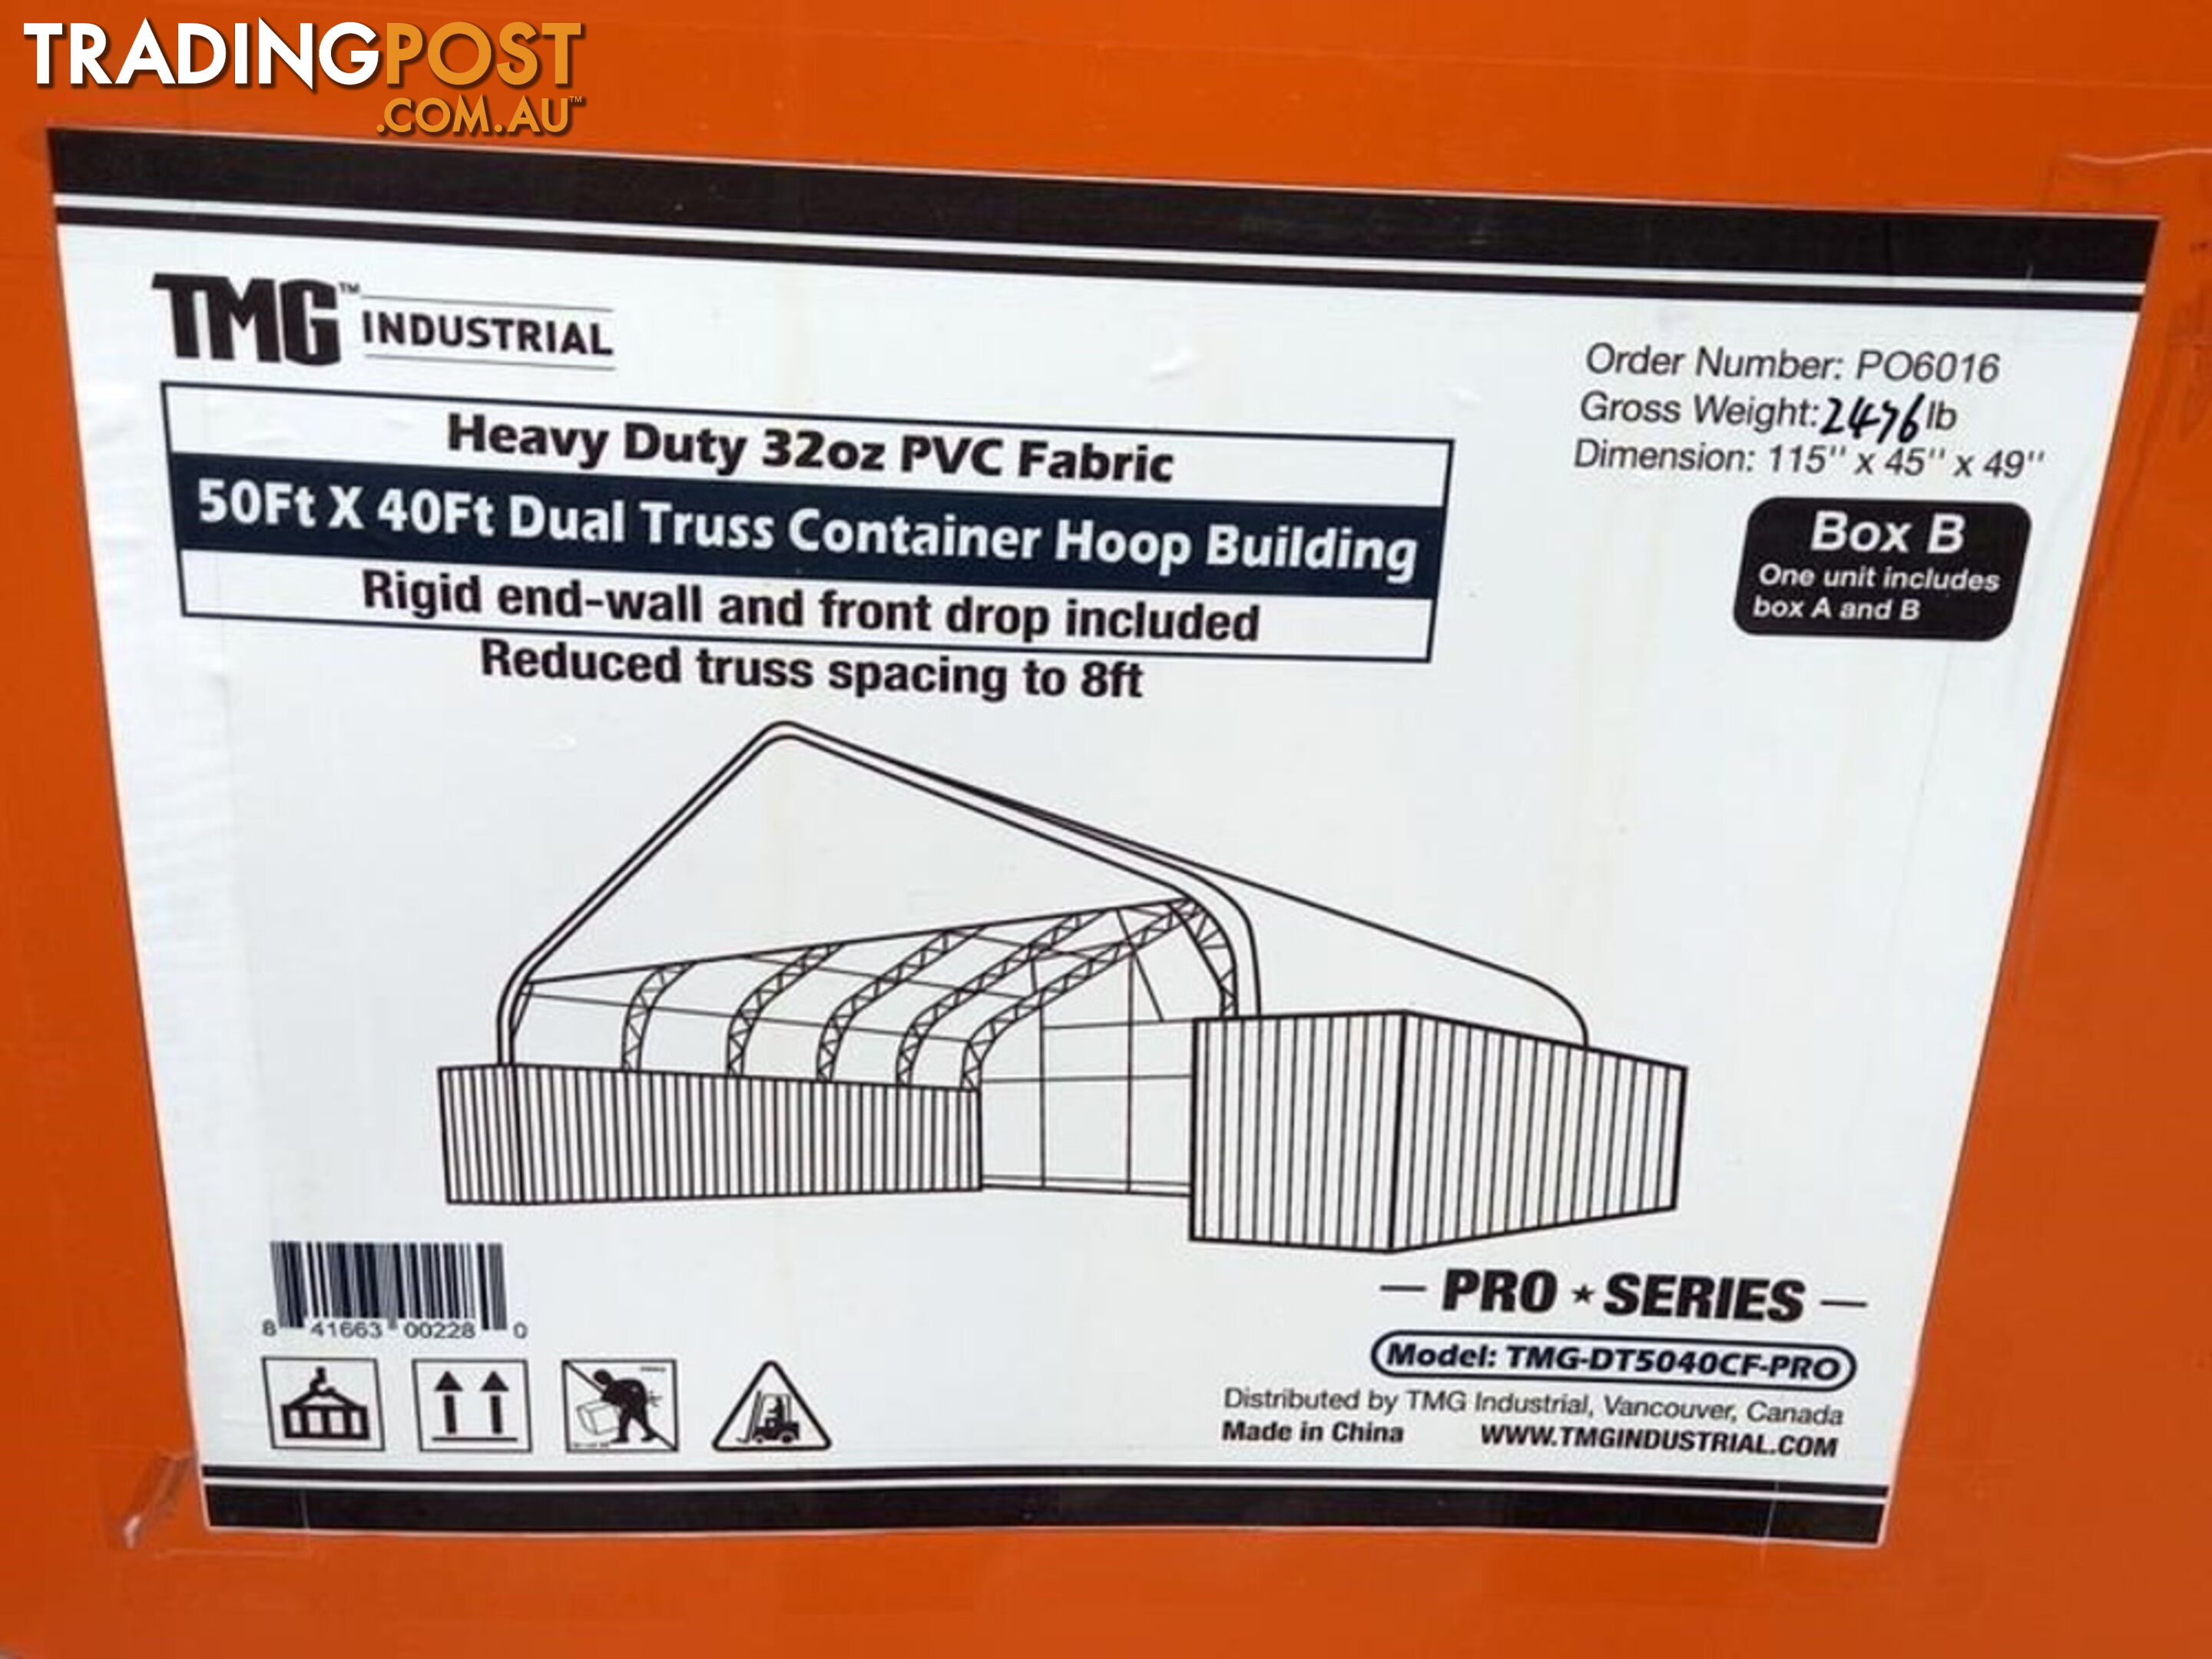 New 15m x 12m Double Trussed Container Shelter Workshop Igloo Dome with EndWalls